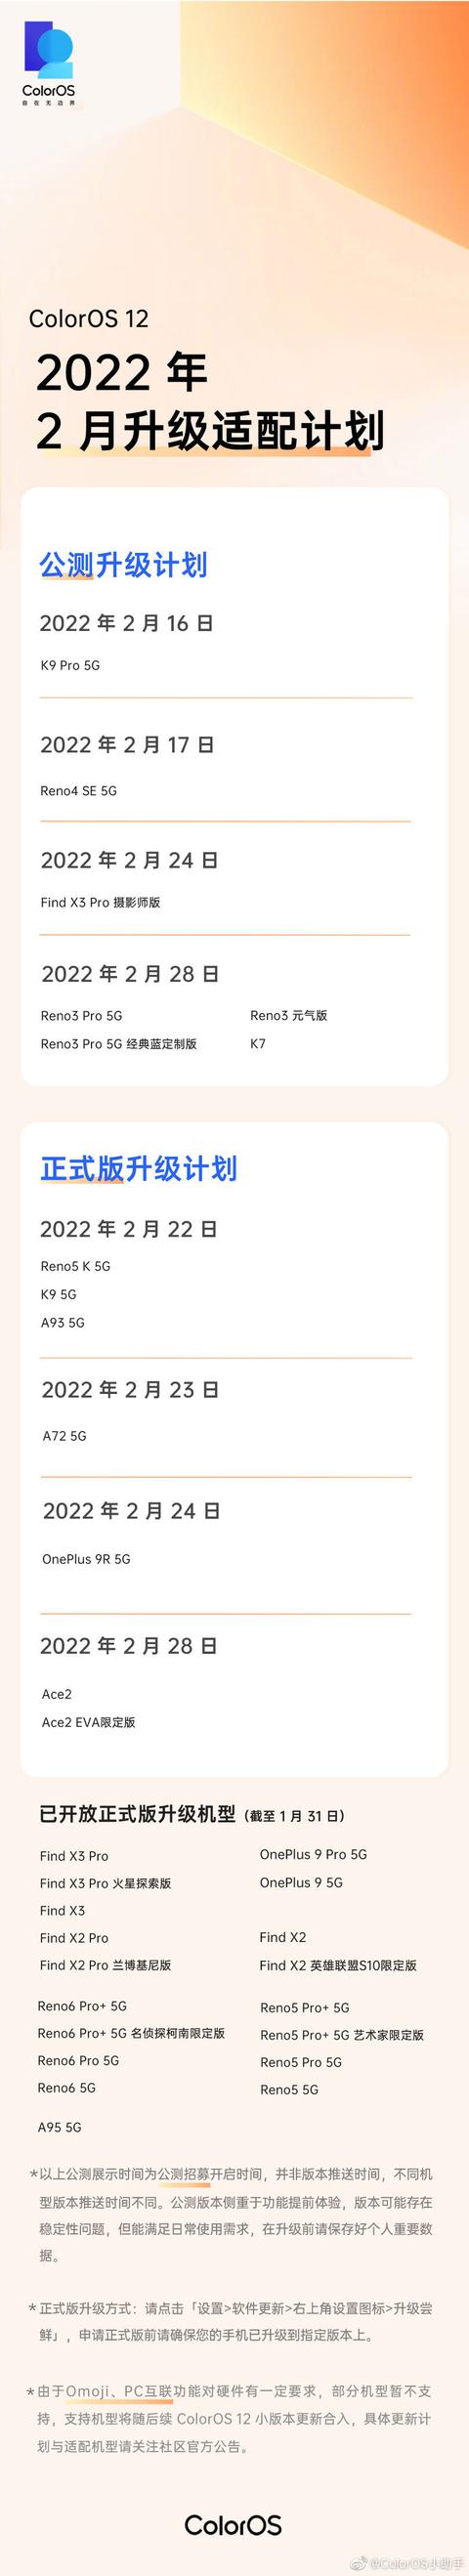 OPPO K9 Pro 开启 ColorOS 12 x Android 12
升级公测招募